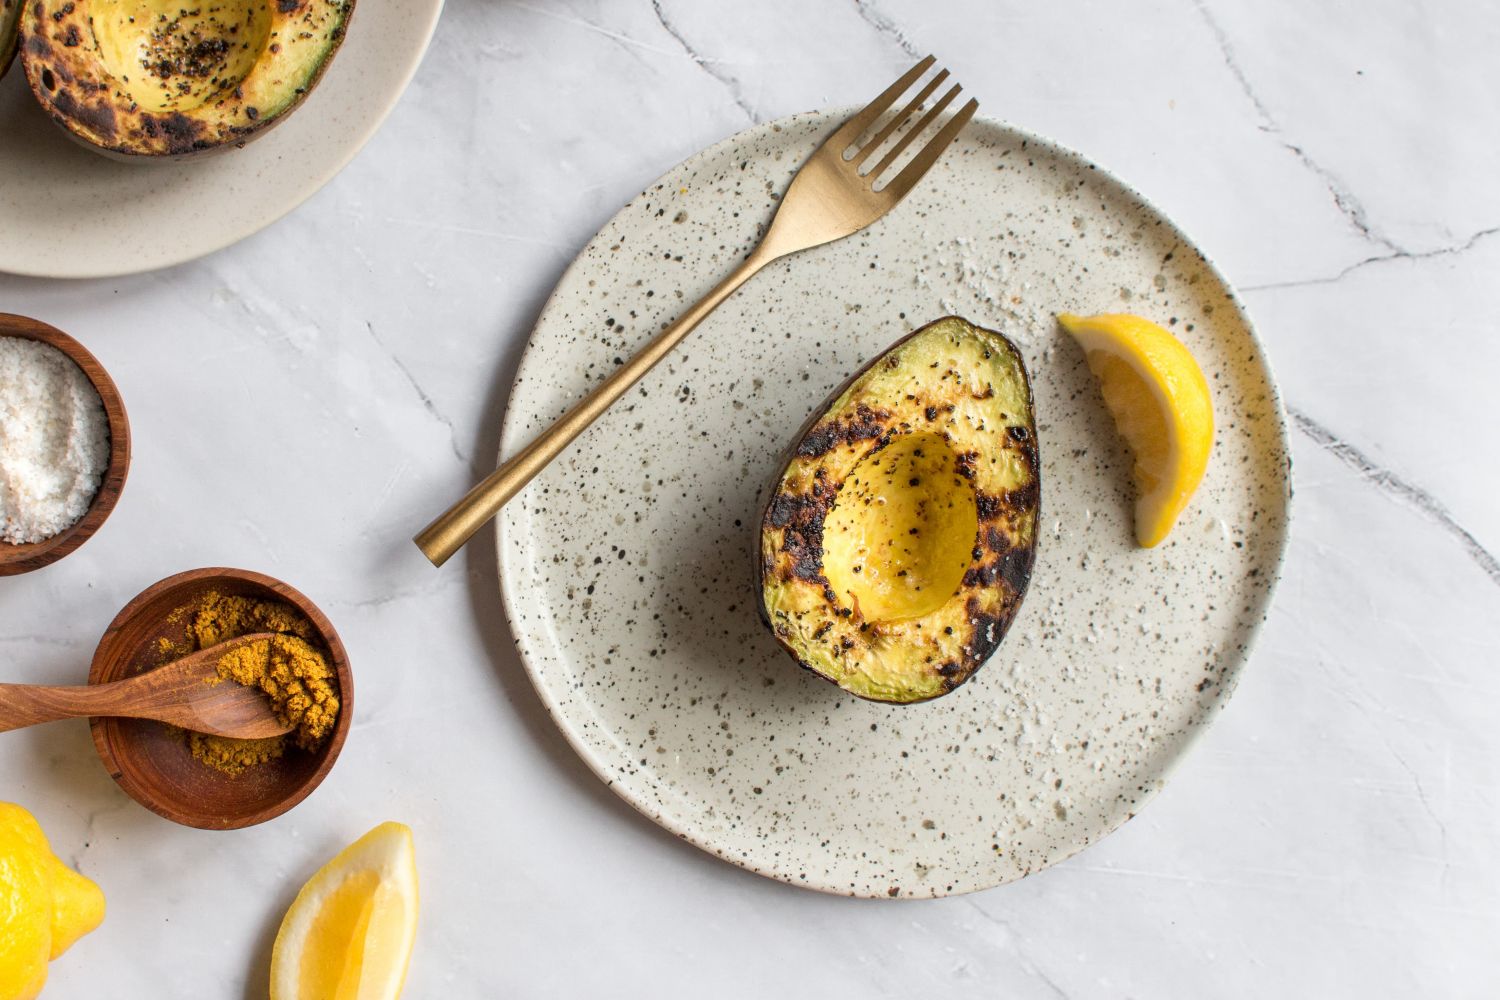 Grilled avocados on a plate with olive oil, lemon, salt, and pepper.